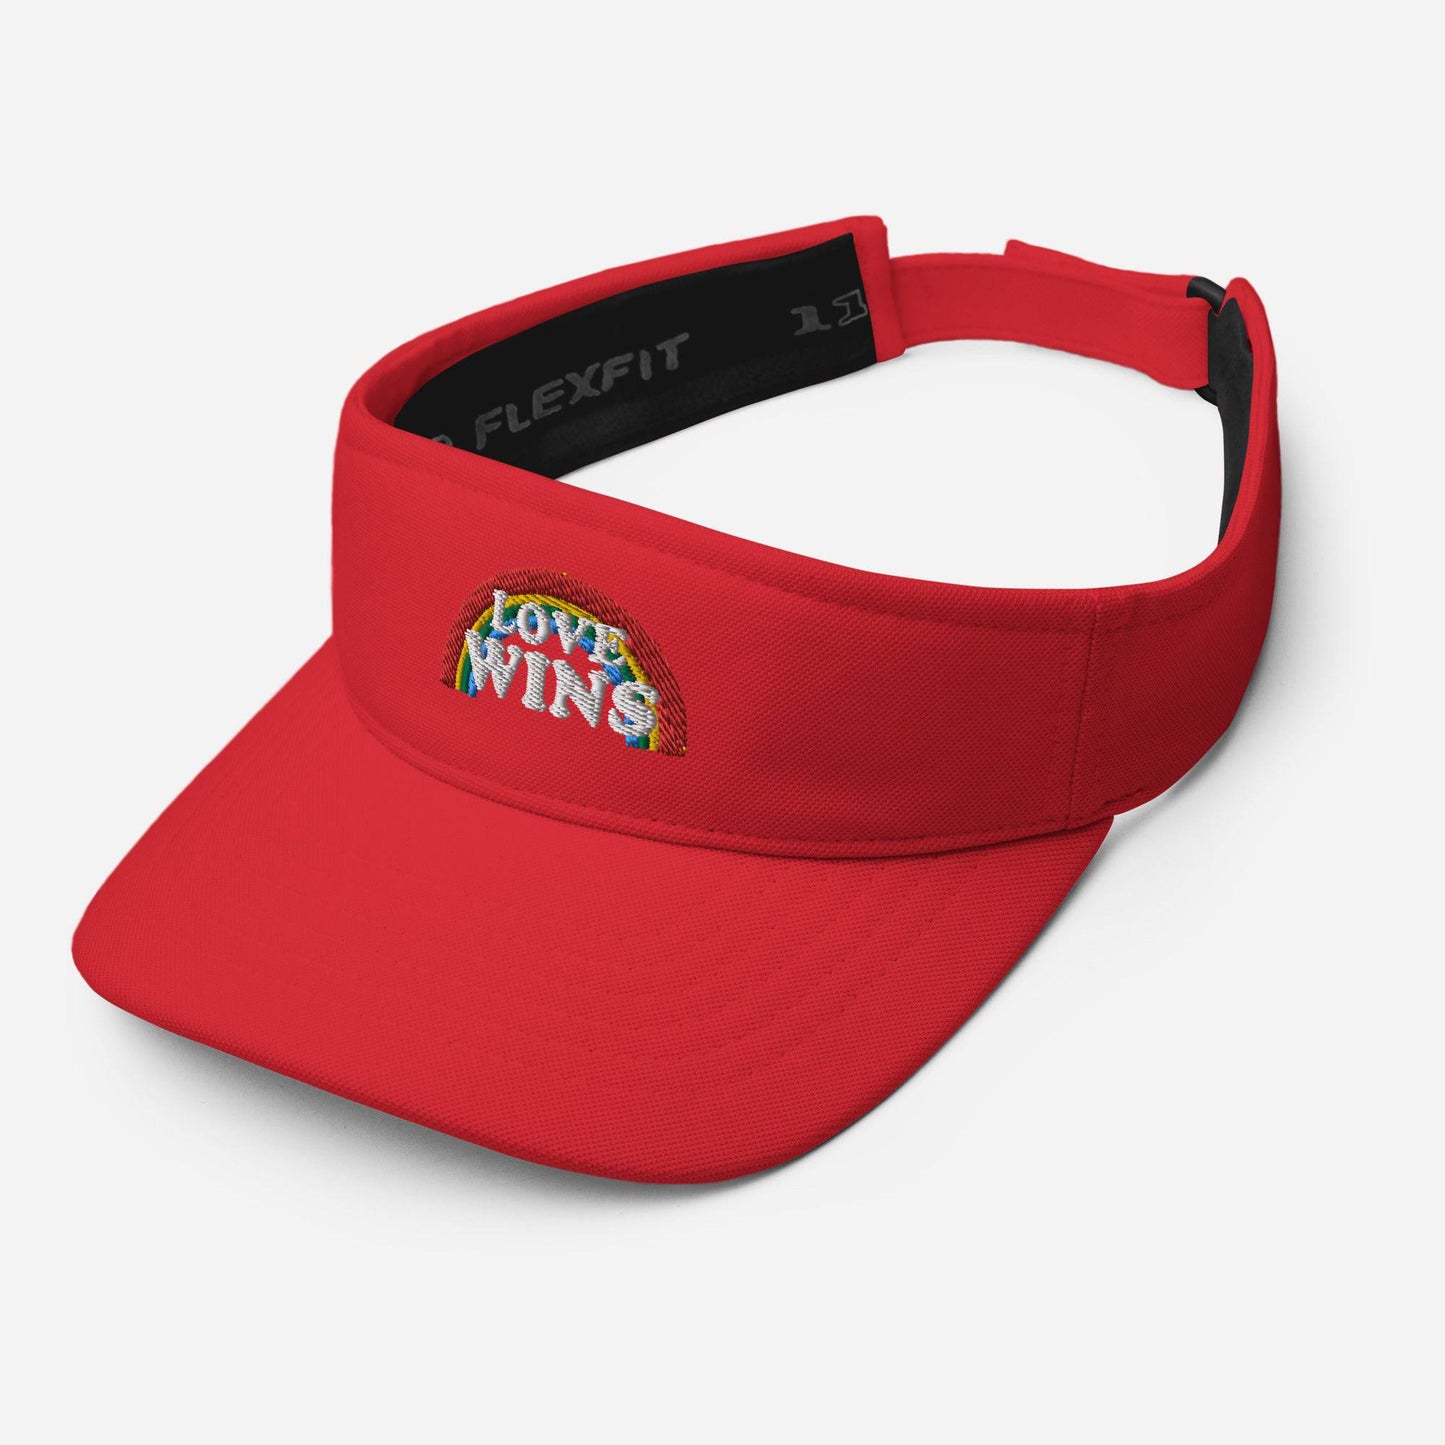 Embroidered Love Wins Rainbow Pride Sports Visor - Rose Gold Co. Shop